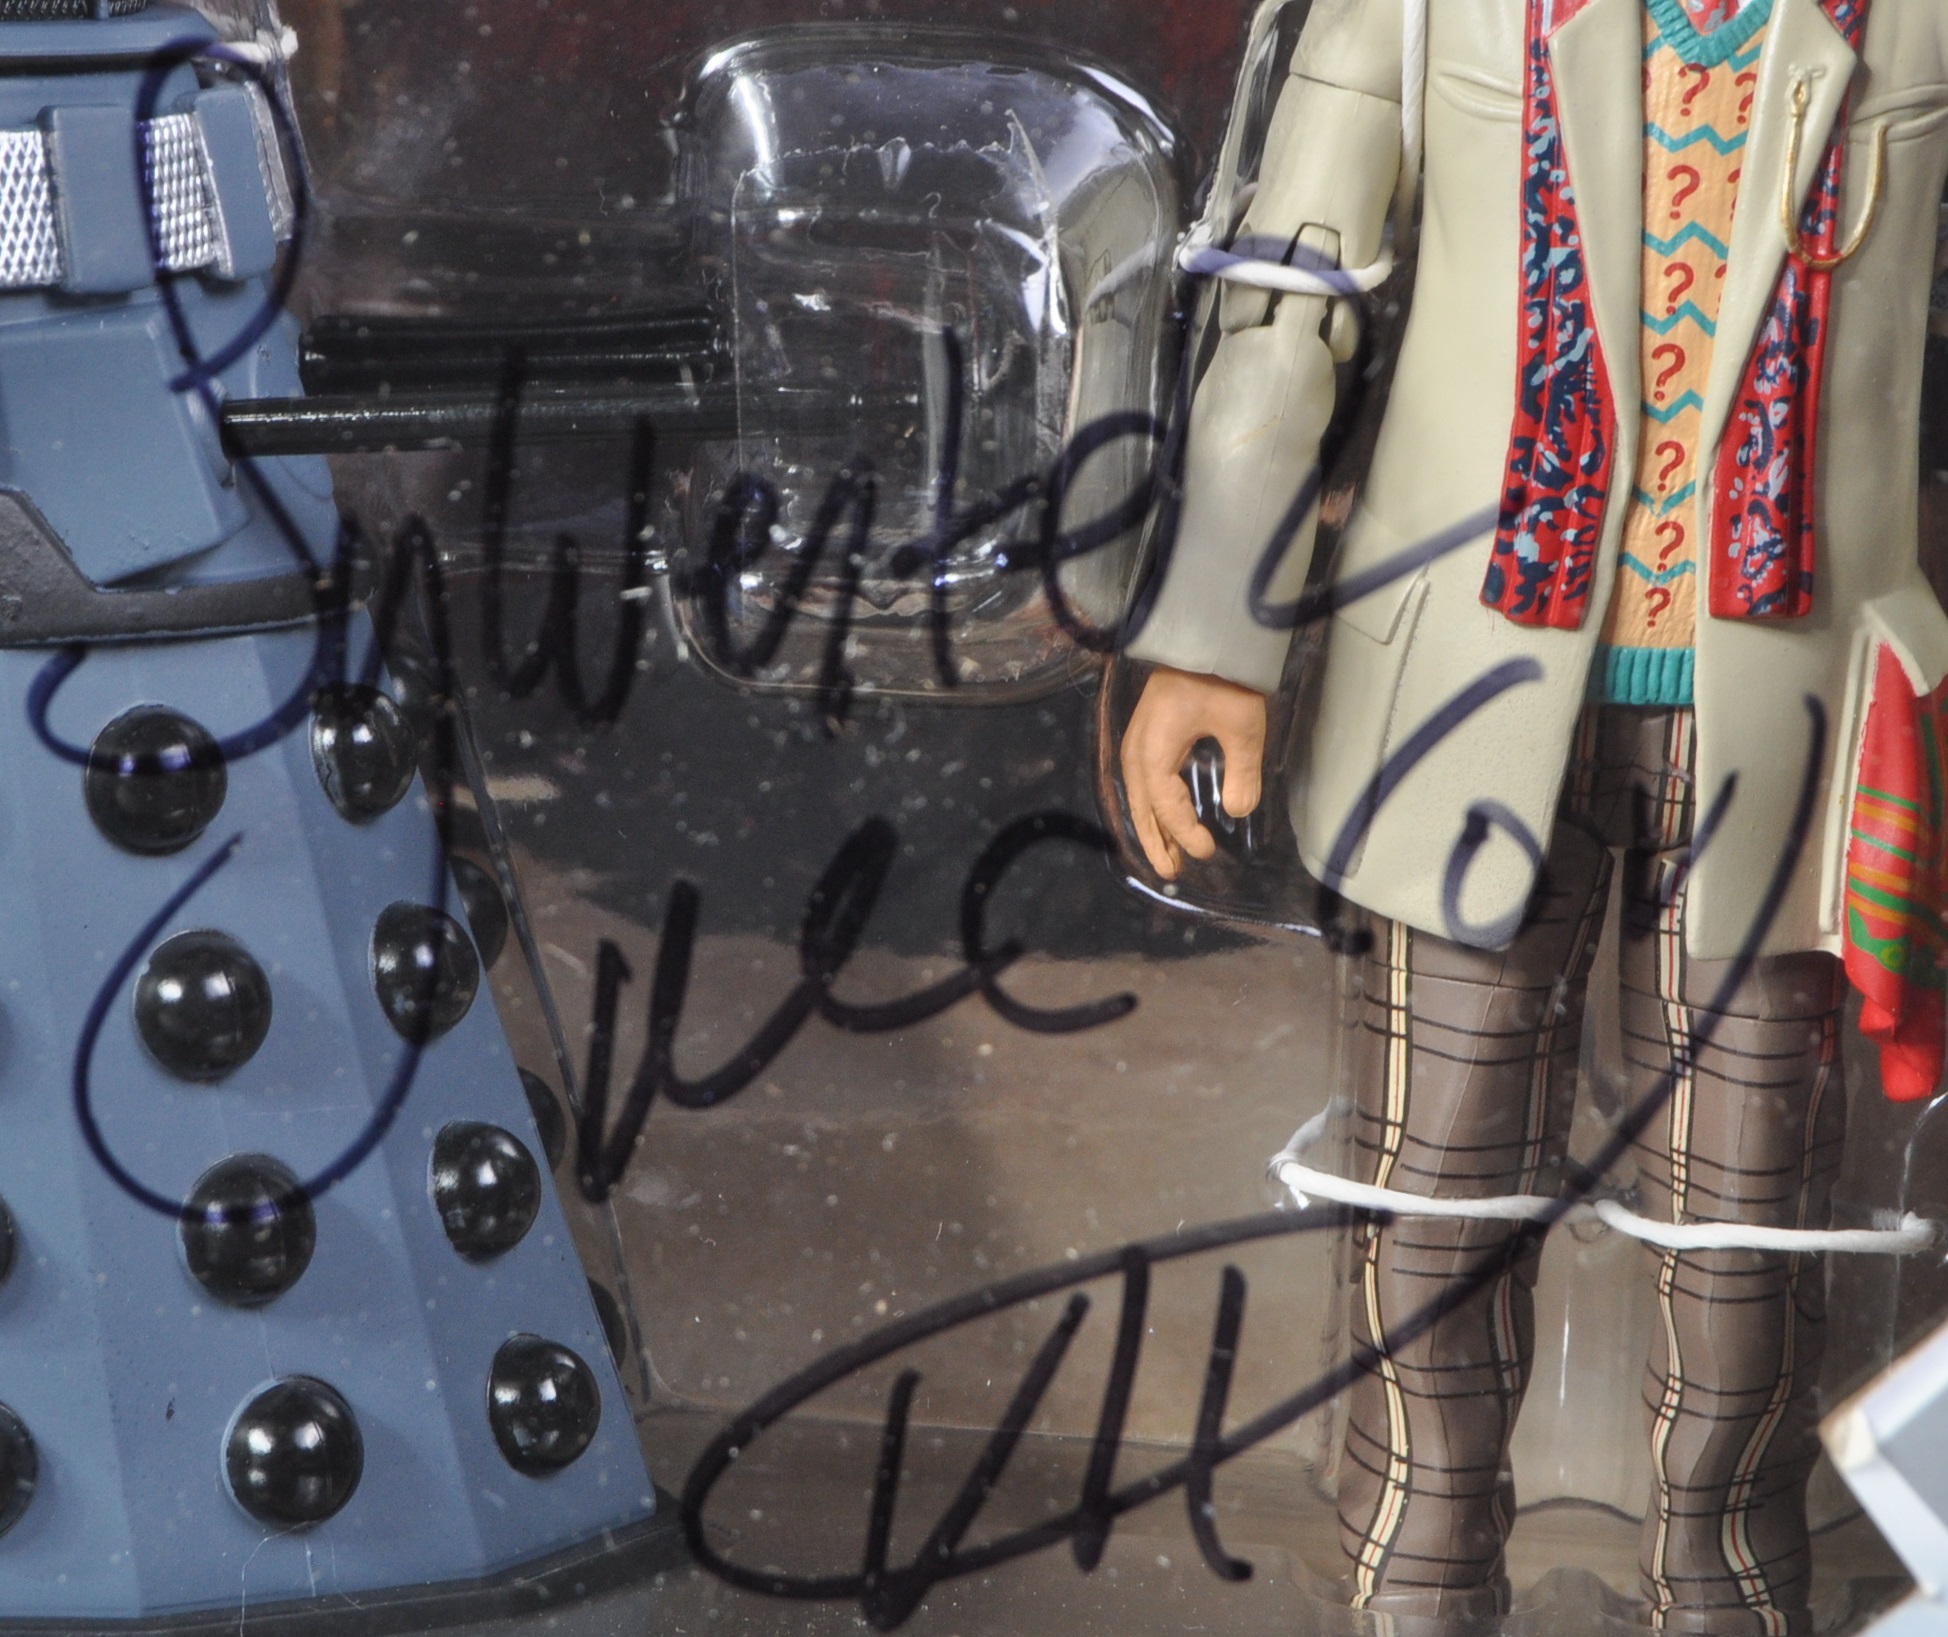 DOCTOR WHO - SYLVESTER MCCOY AUTOGRAPHED ACTION FIGURE - Image 4 of 5